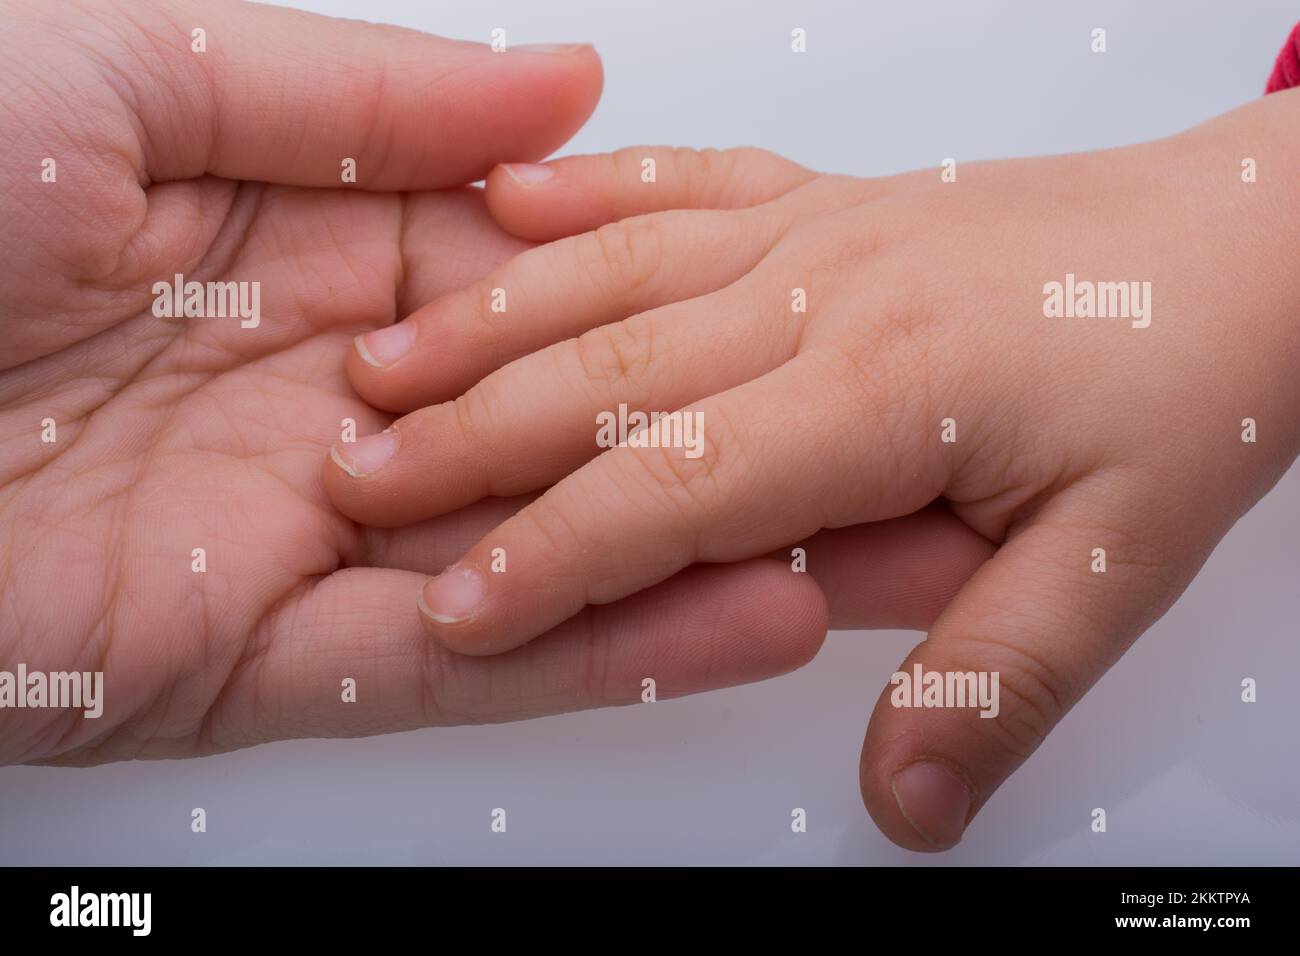 Child and grown up hands together on a white backgkround Stock Photo